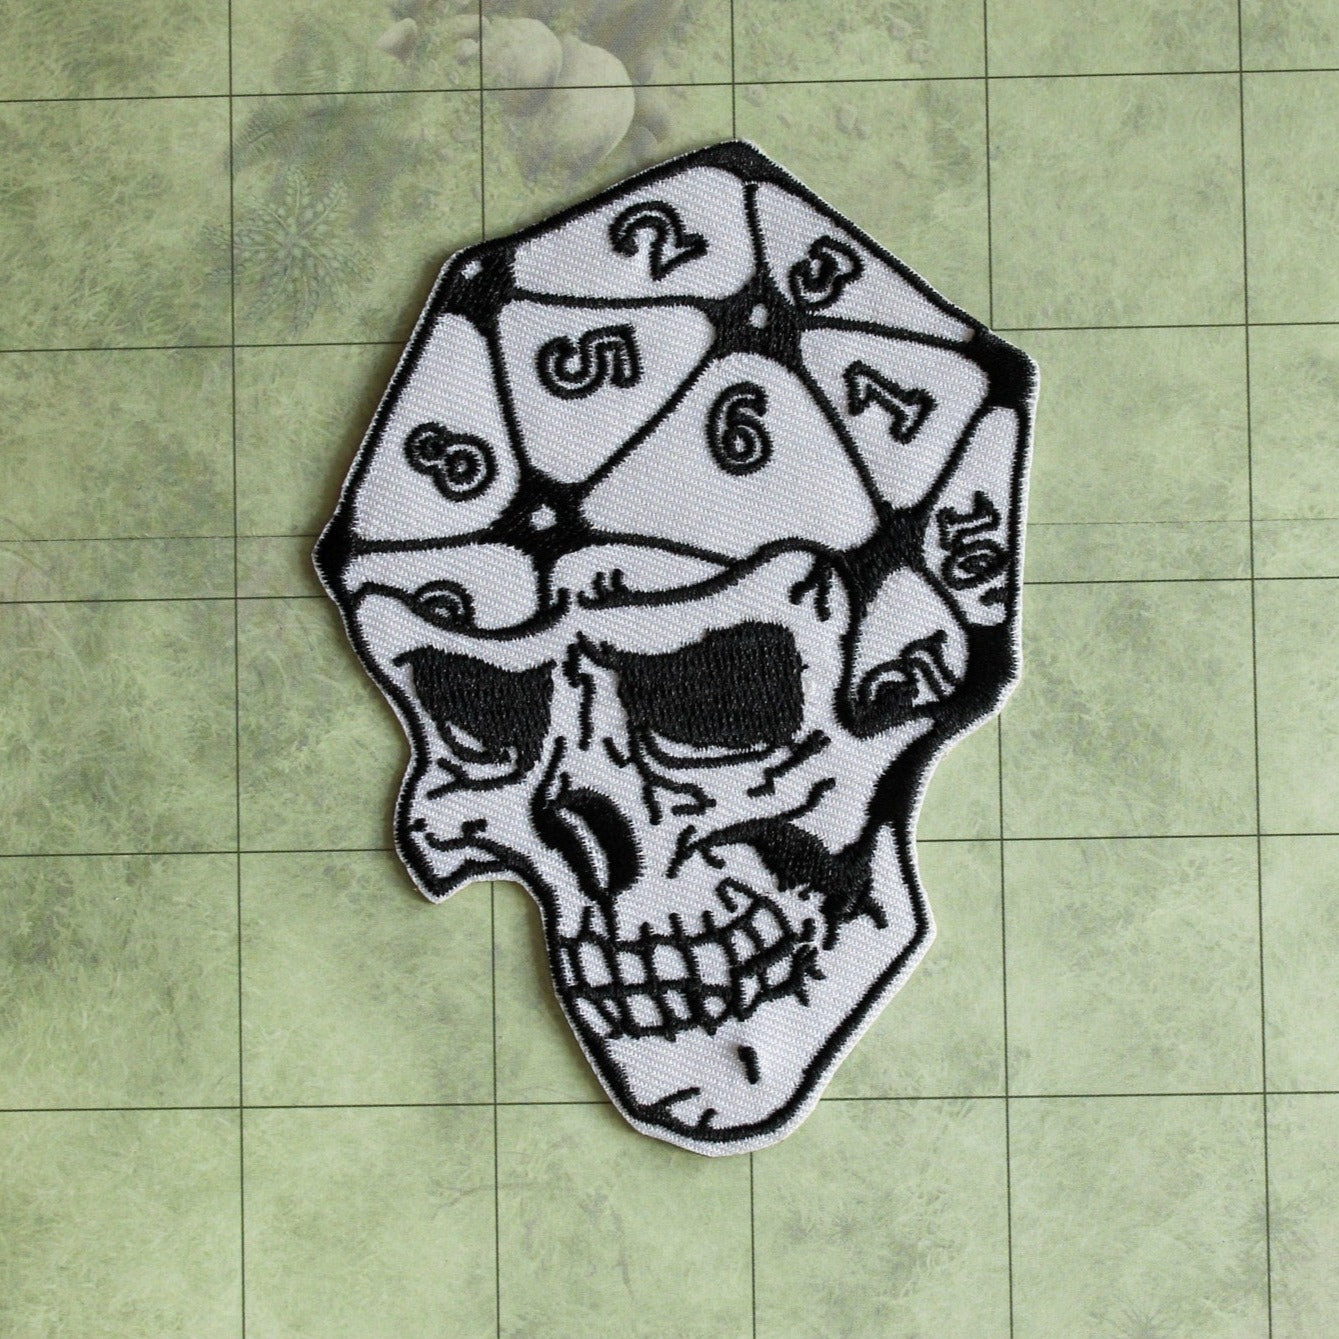 Dungeons & Dragons D20 Dice Skull Embroidered Patch - DnD | Black and White | Large Patch | Cool and Edgy | DND Patch Collector - MysteryDiceGoblins